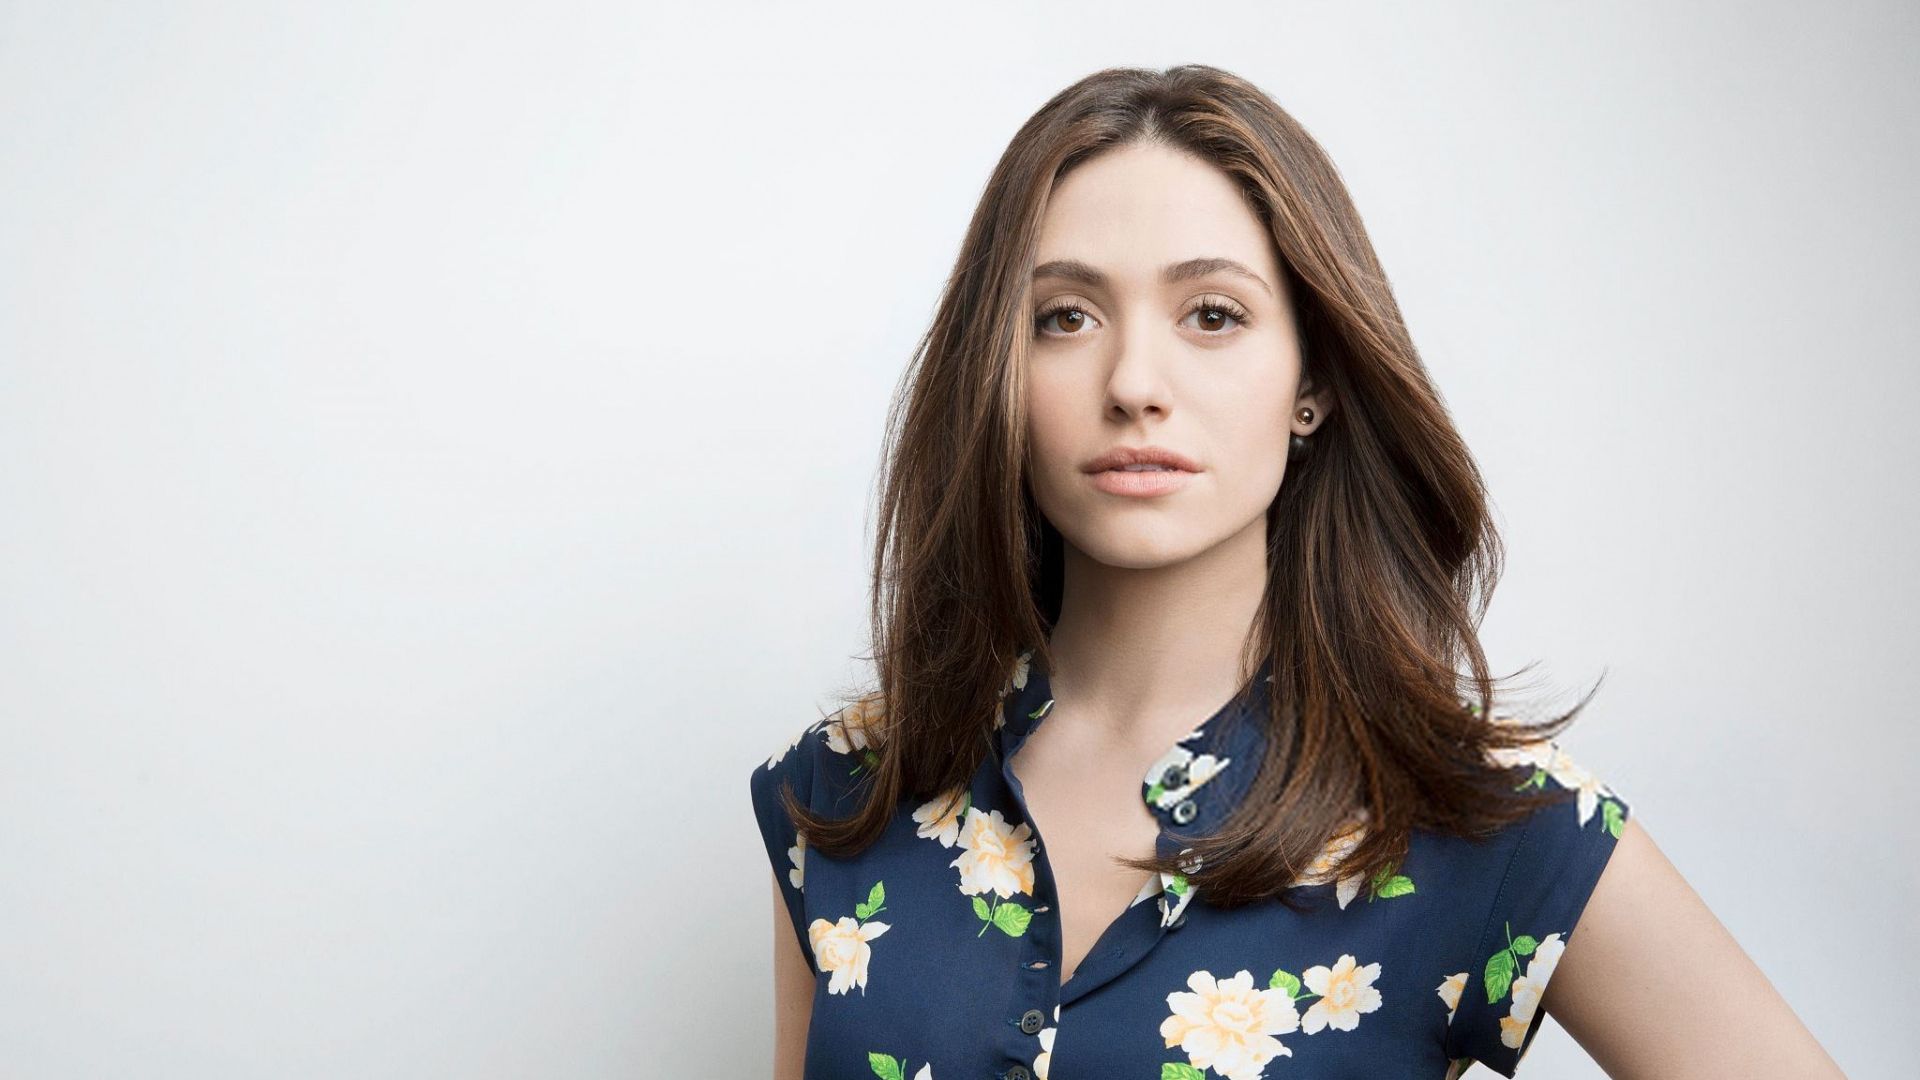 Actress and singer Emmy Rossum